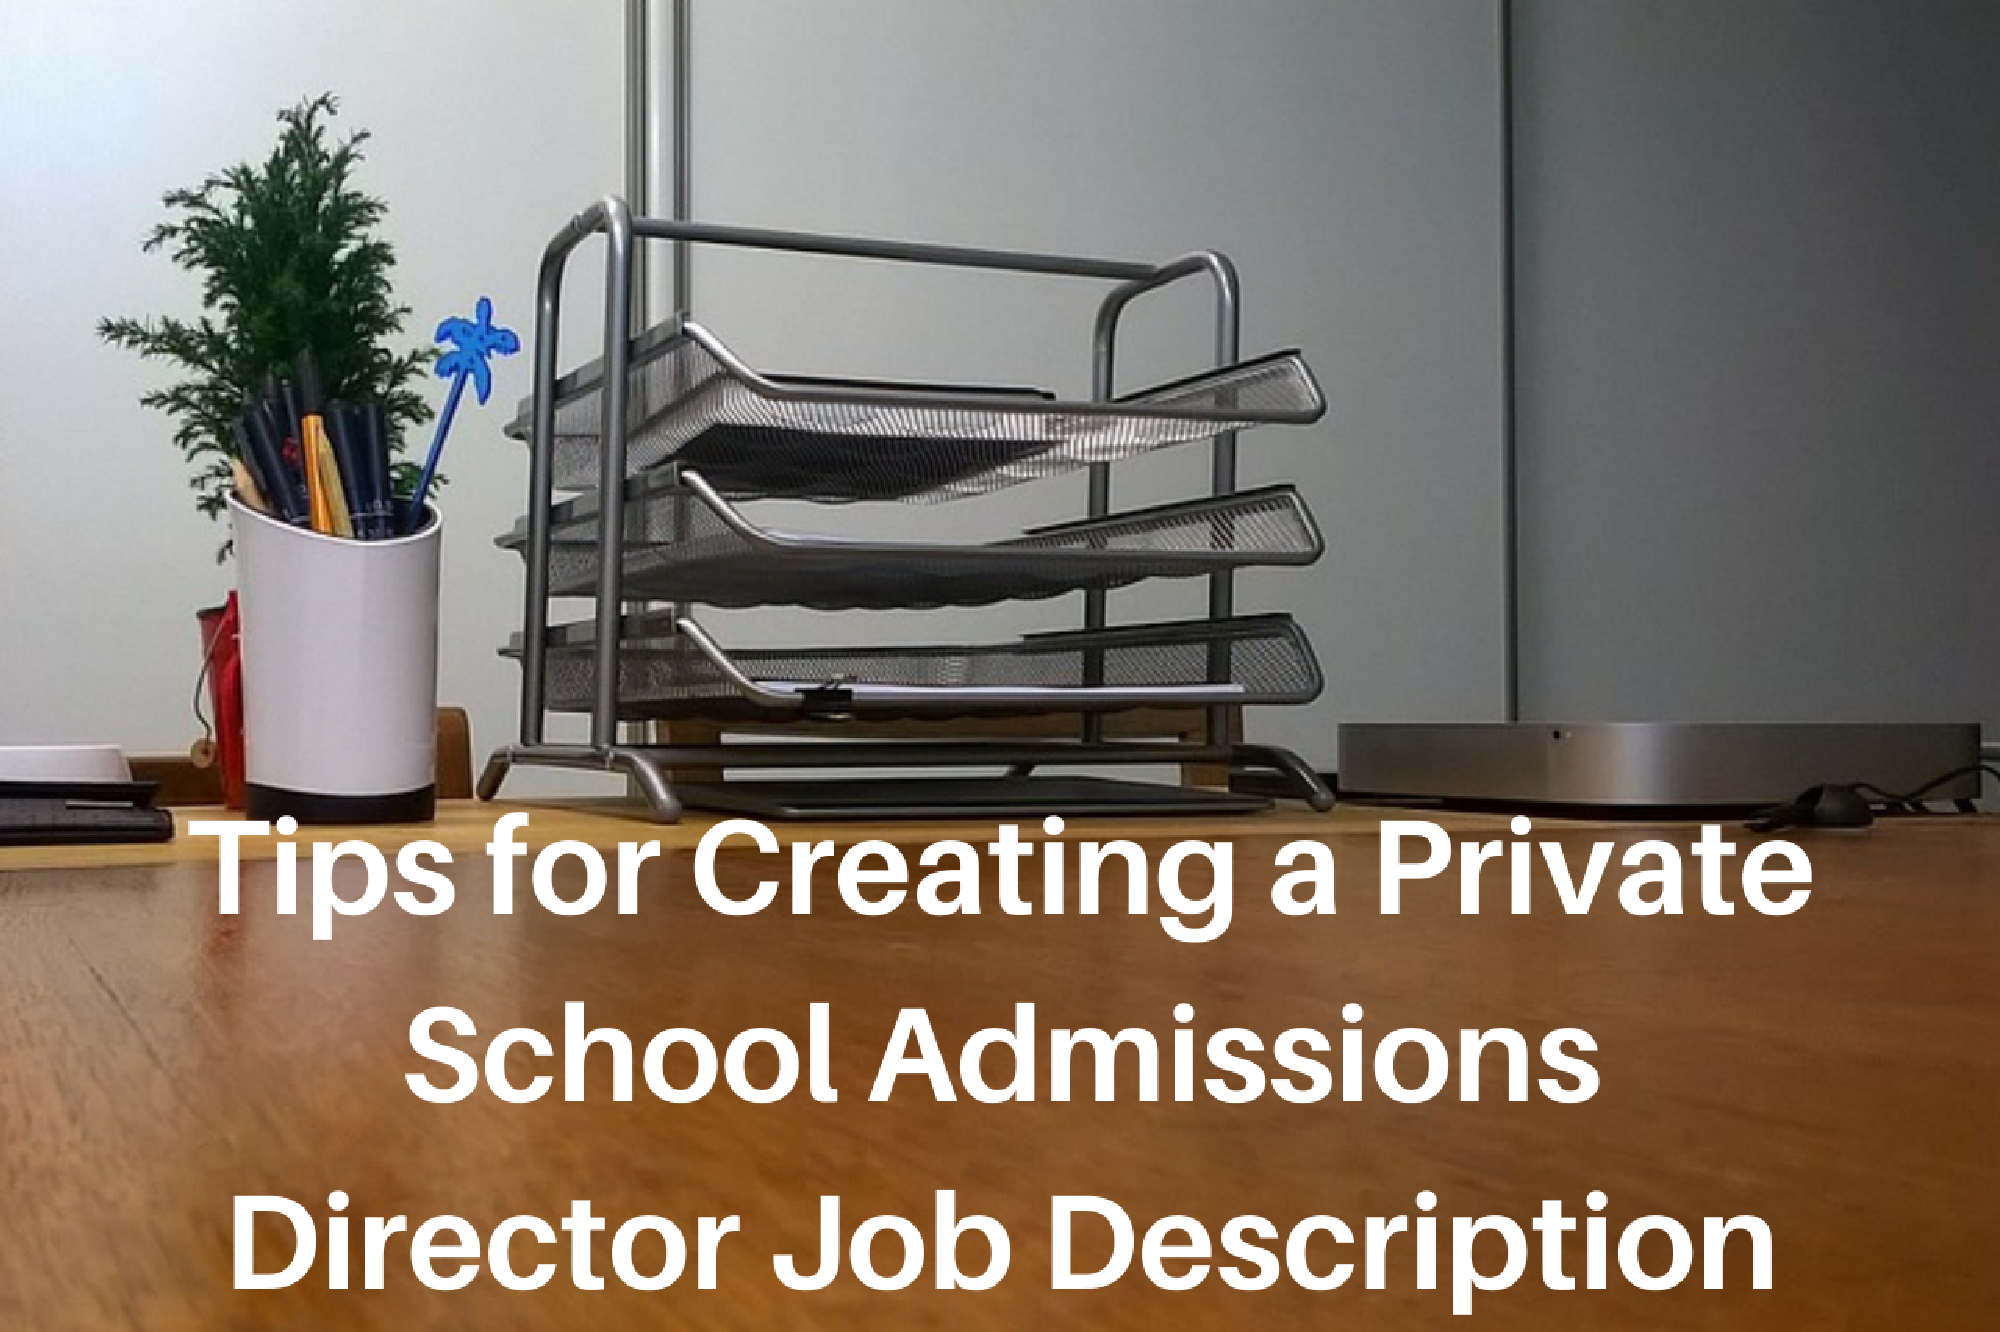 Tips For Creating A Private School Admissions Director Job Description